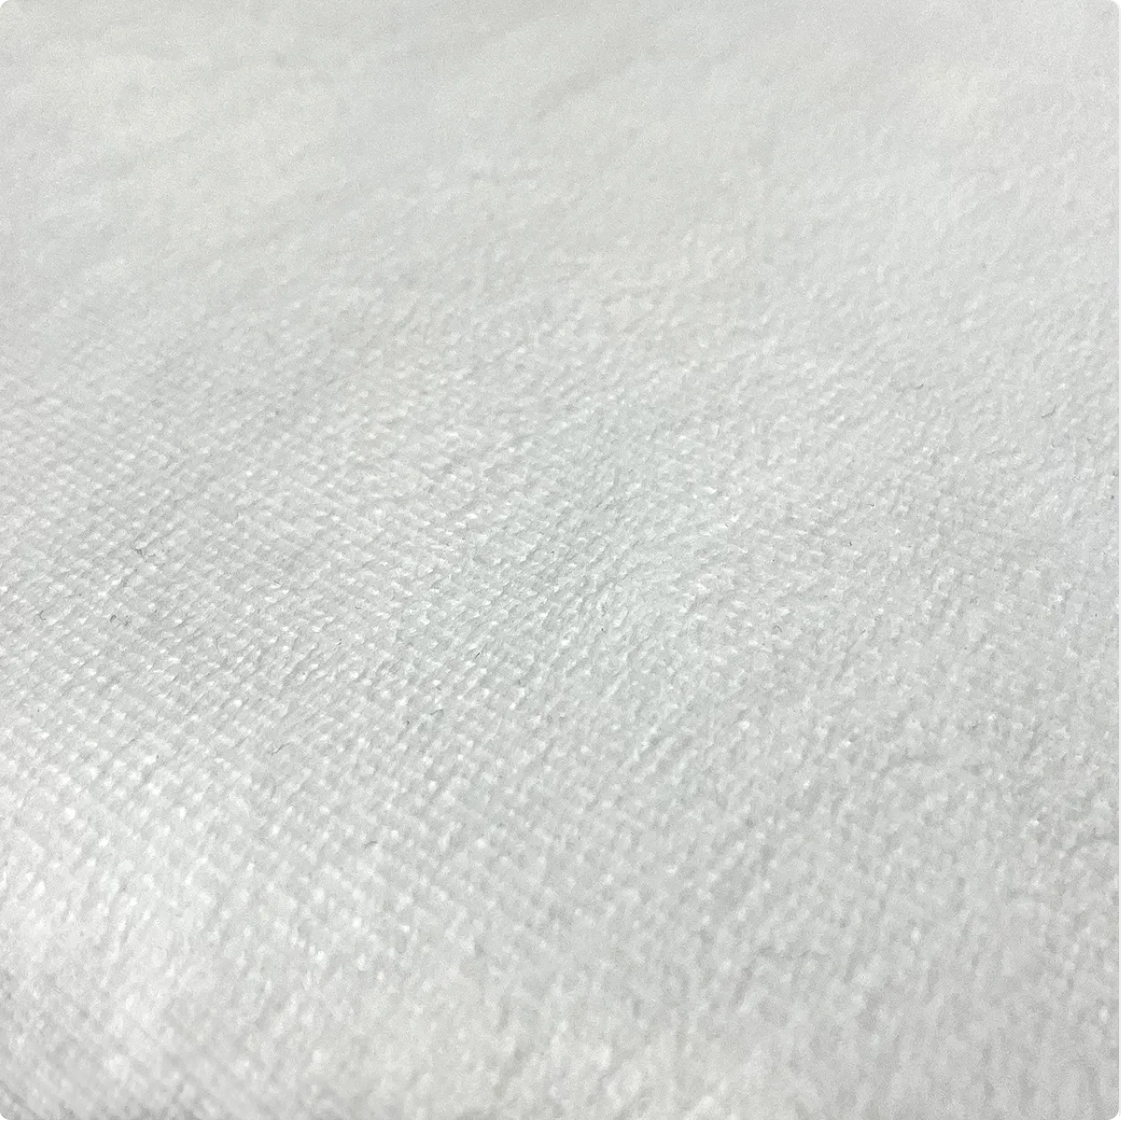 Image of sample fabric. Outer polyester fabric with soft brushed finish.